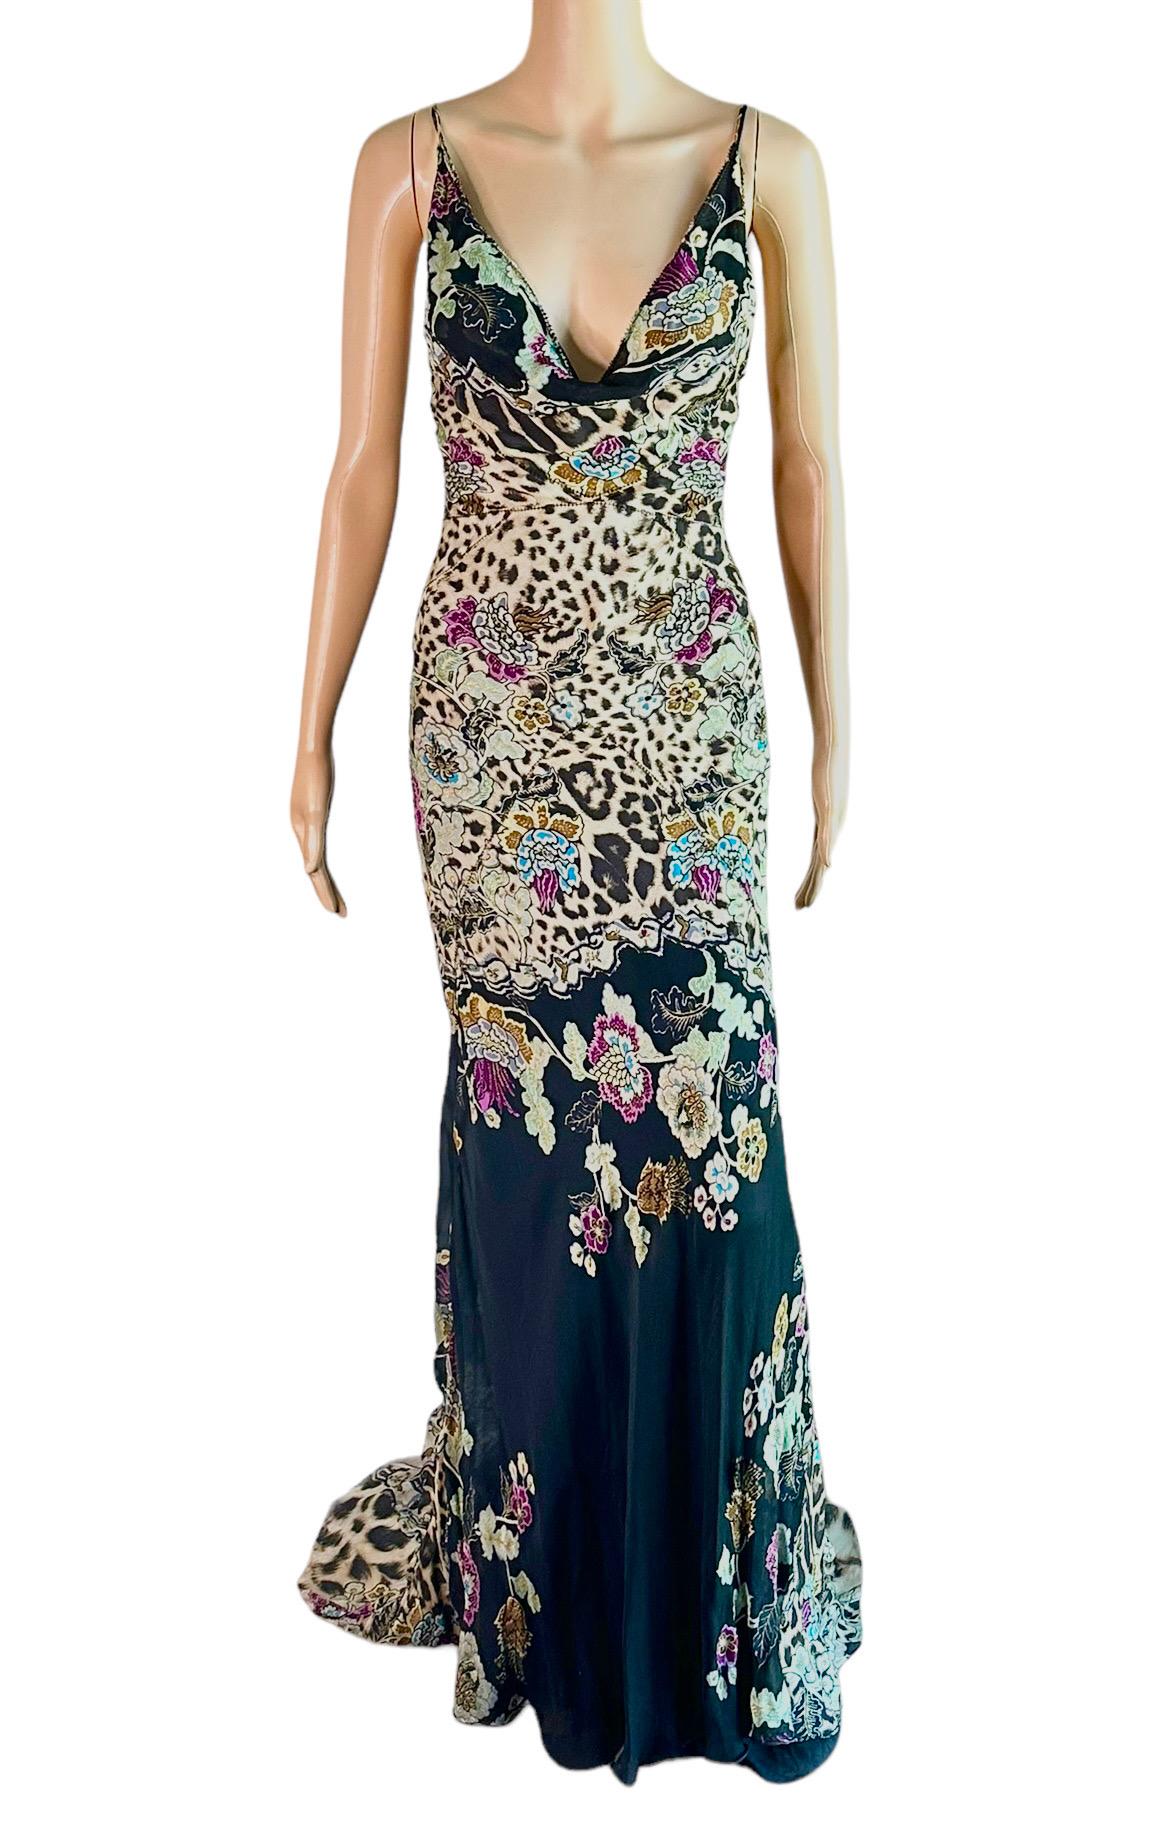 Roberto Cavalli S/S 2003 Chinoiserie Print Silk Train Maxi Evening Dress Gown For Sale 5